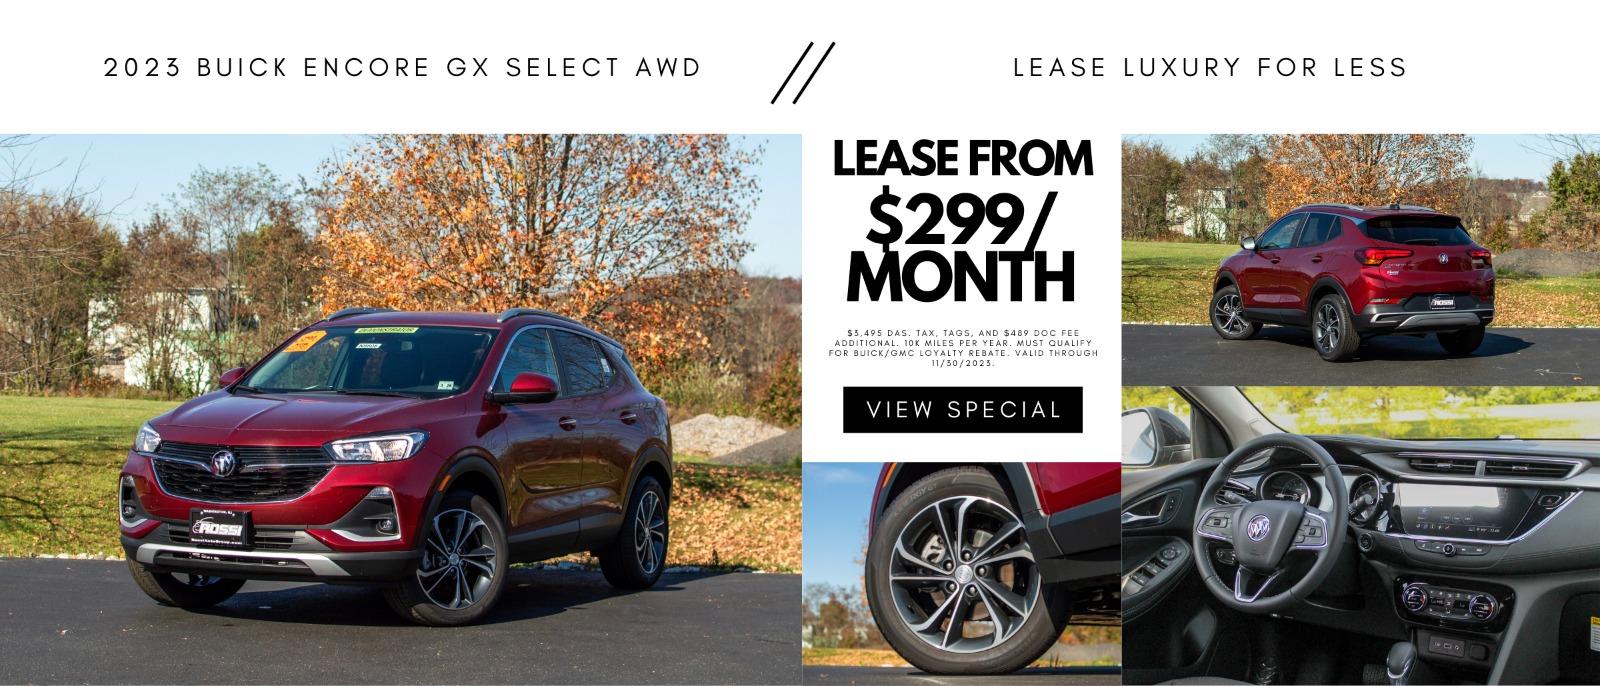 red 2023 Buick Encore GX lease deal in Washington, NJ | Rossi Chevrolet Buick GMC